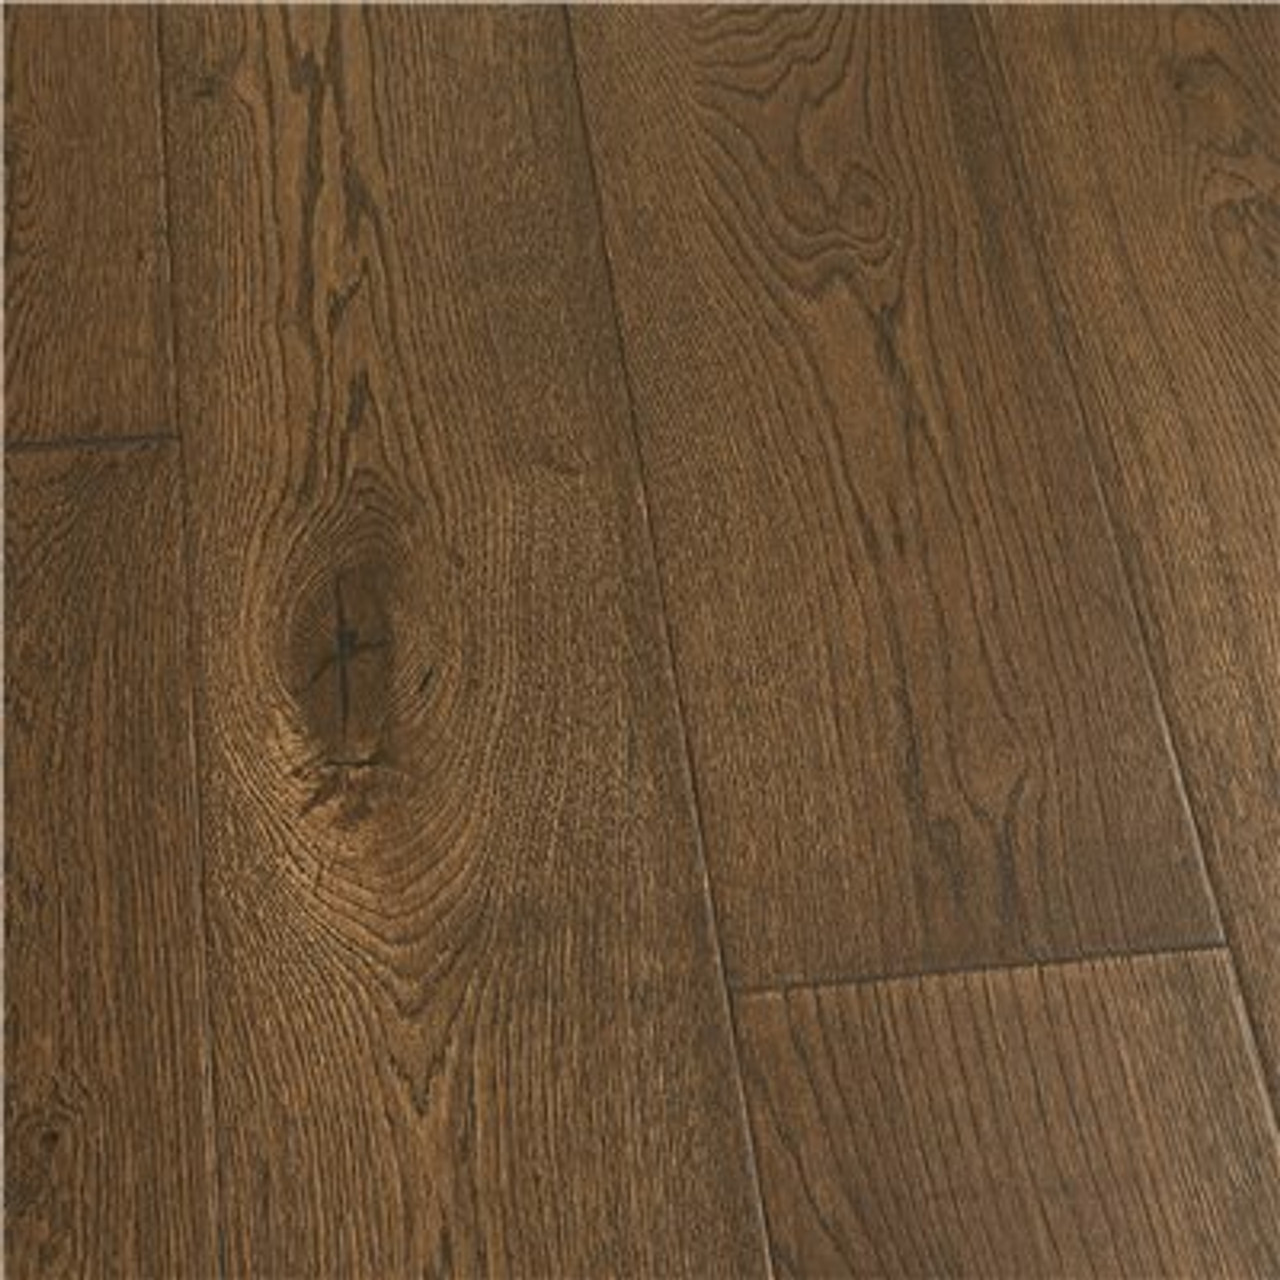 French Oak Stinson 1/2 In. Thick X 7-1/2 In. Wide X Varying Length Engineered Hardwood Flooring (23.31 Sq. Ft./Case)